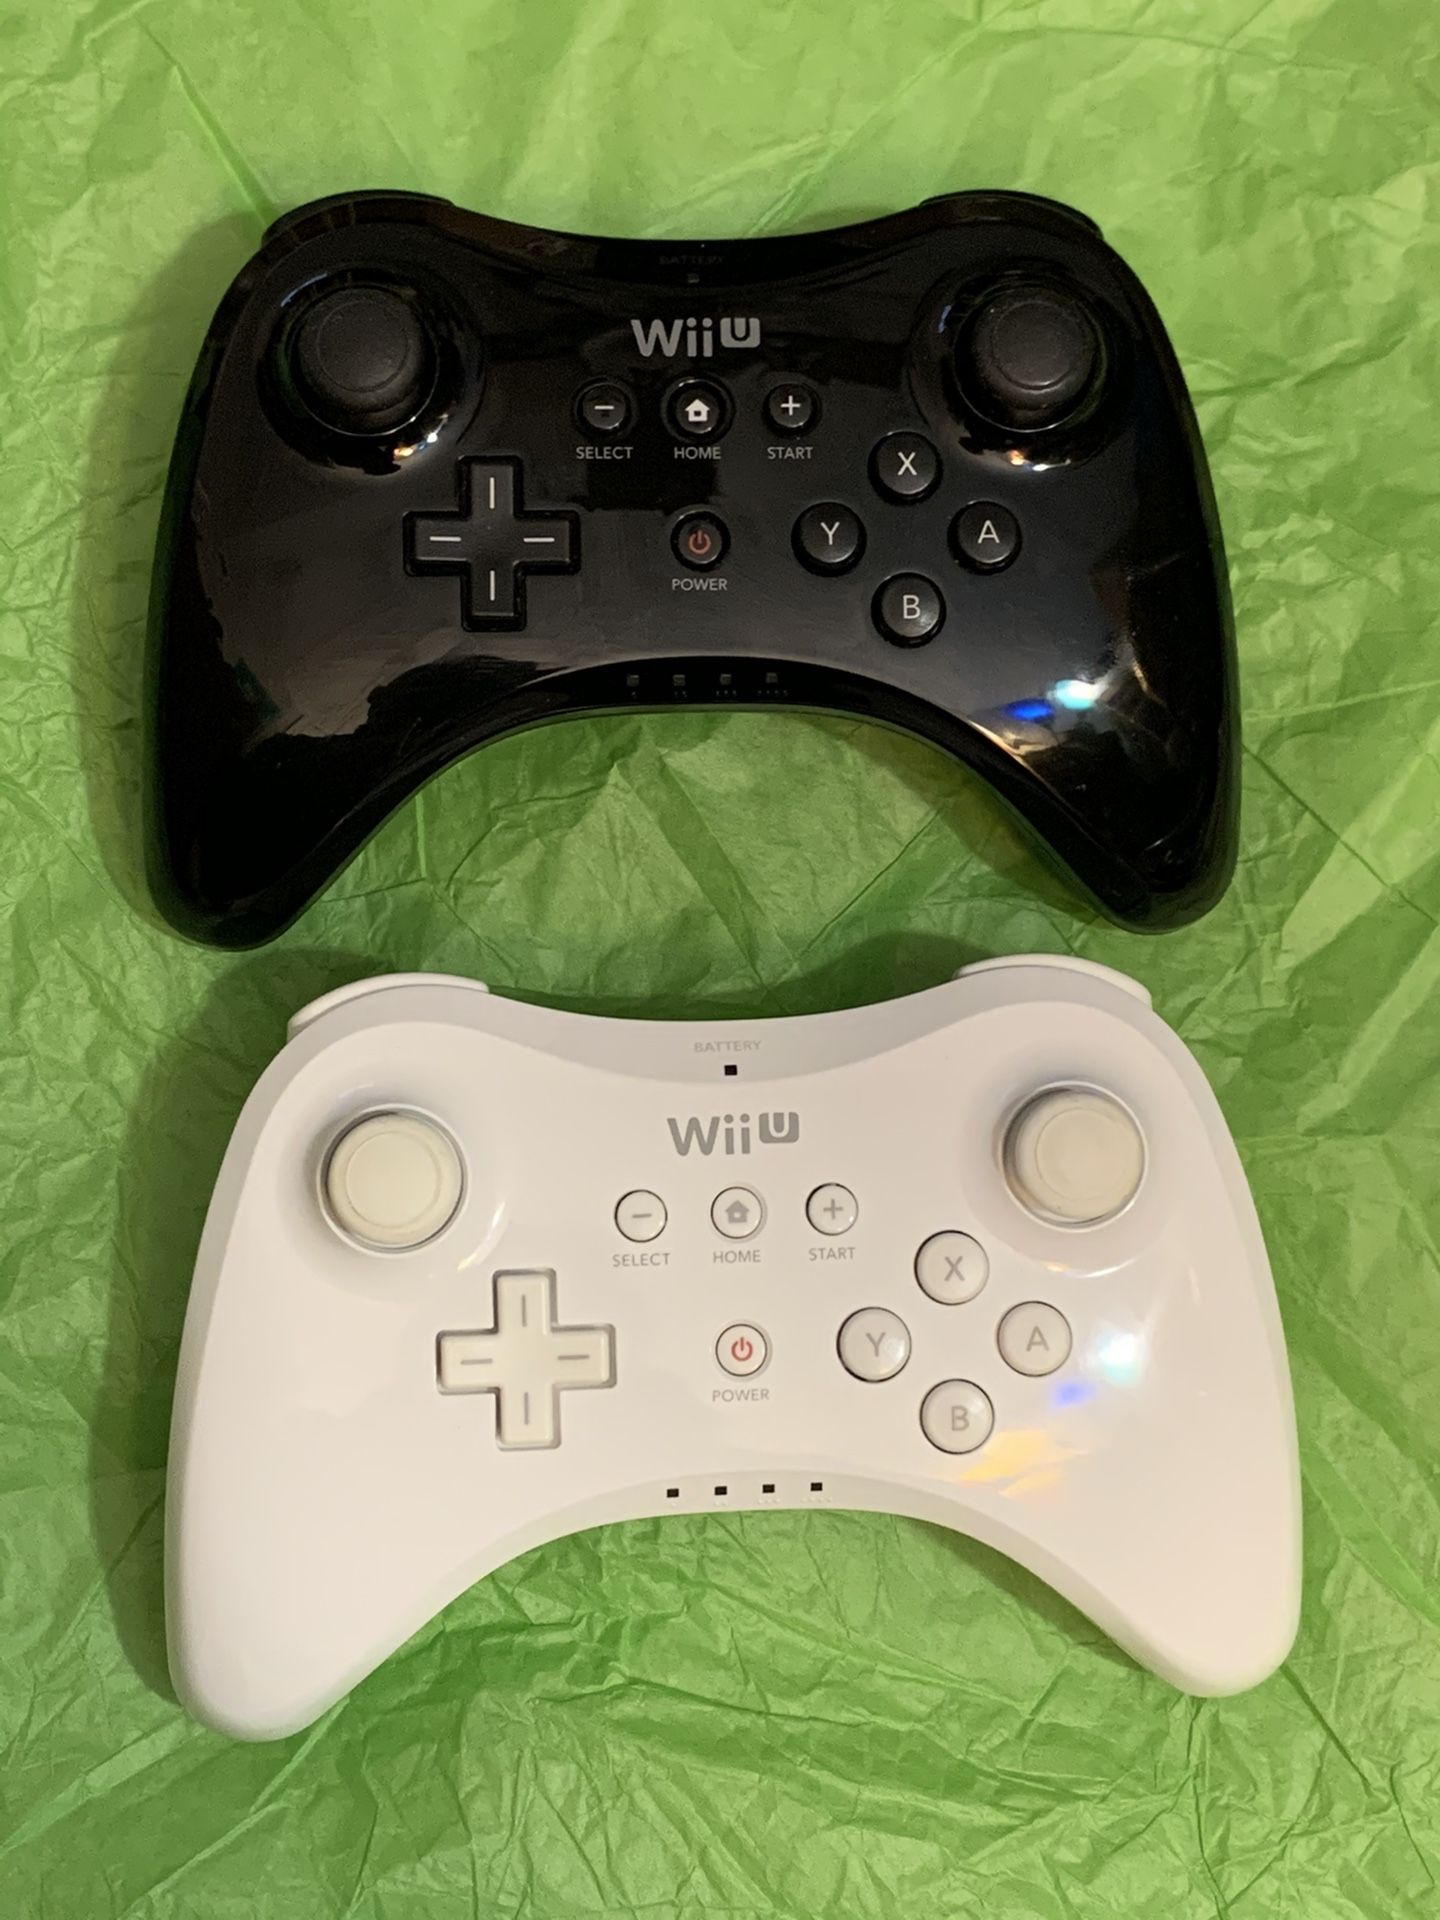 Pair of Wii U Pro Wireless Controllers